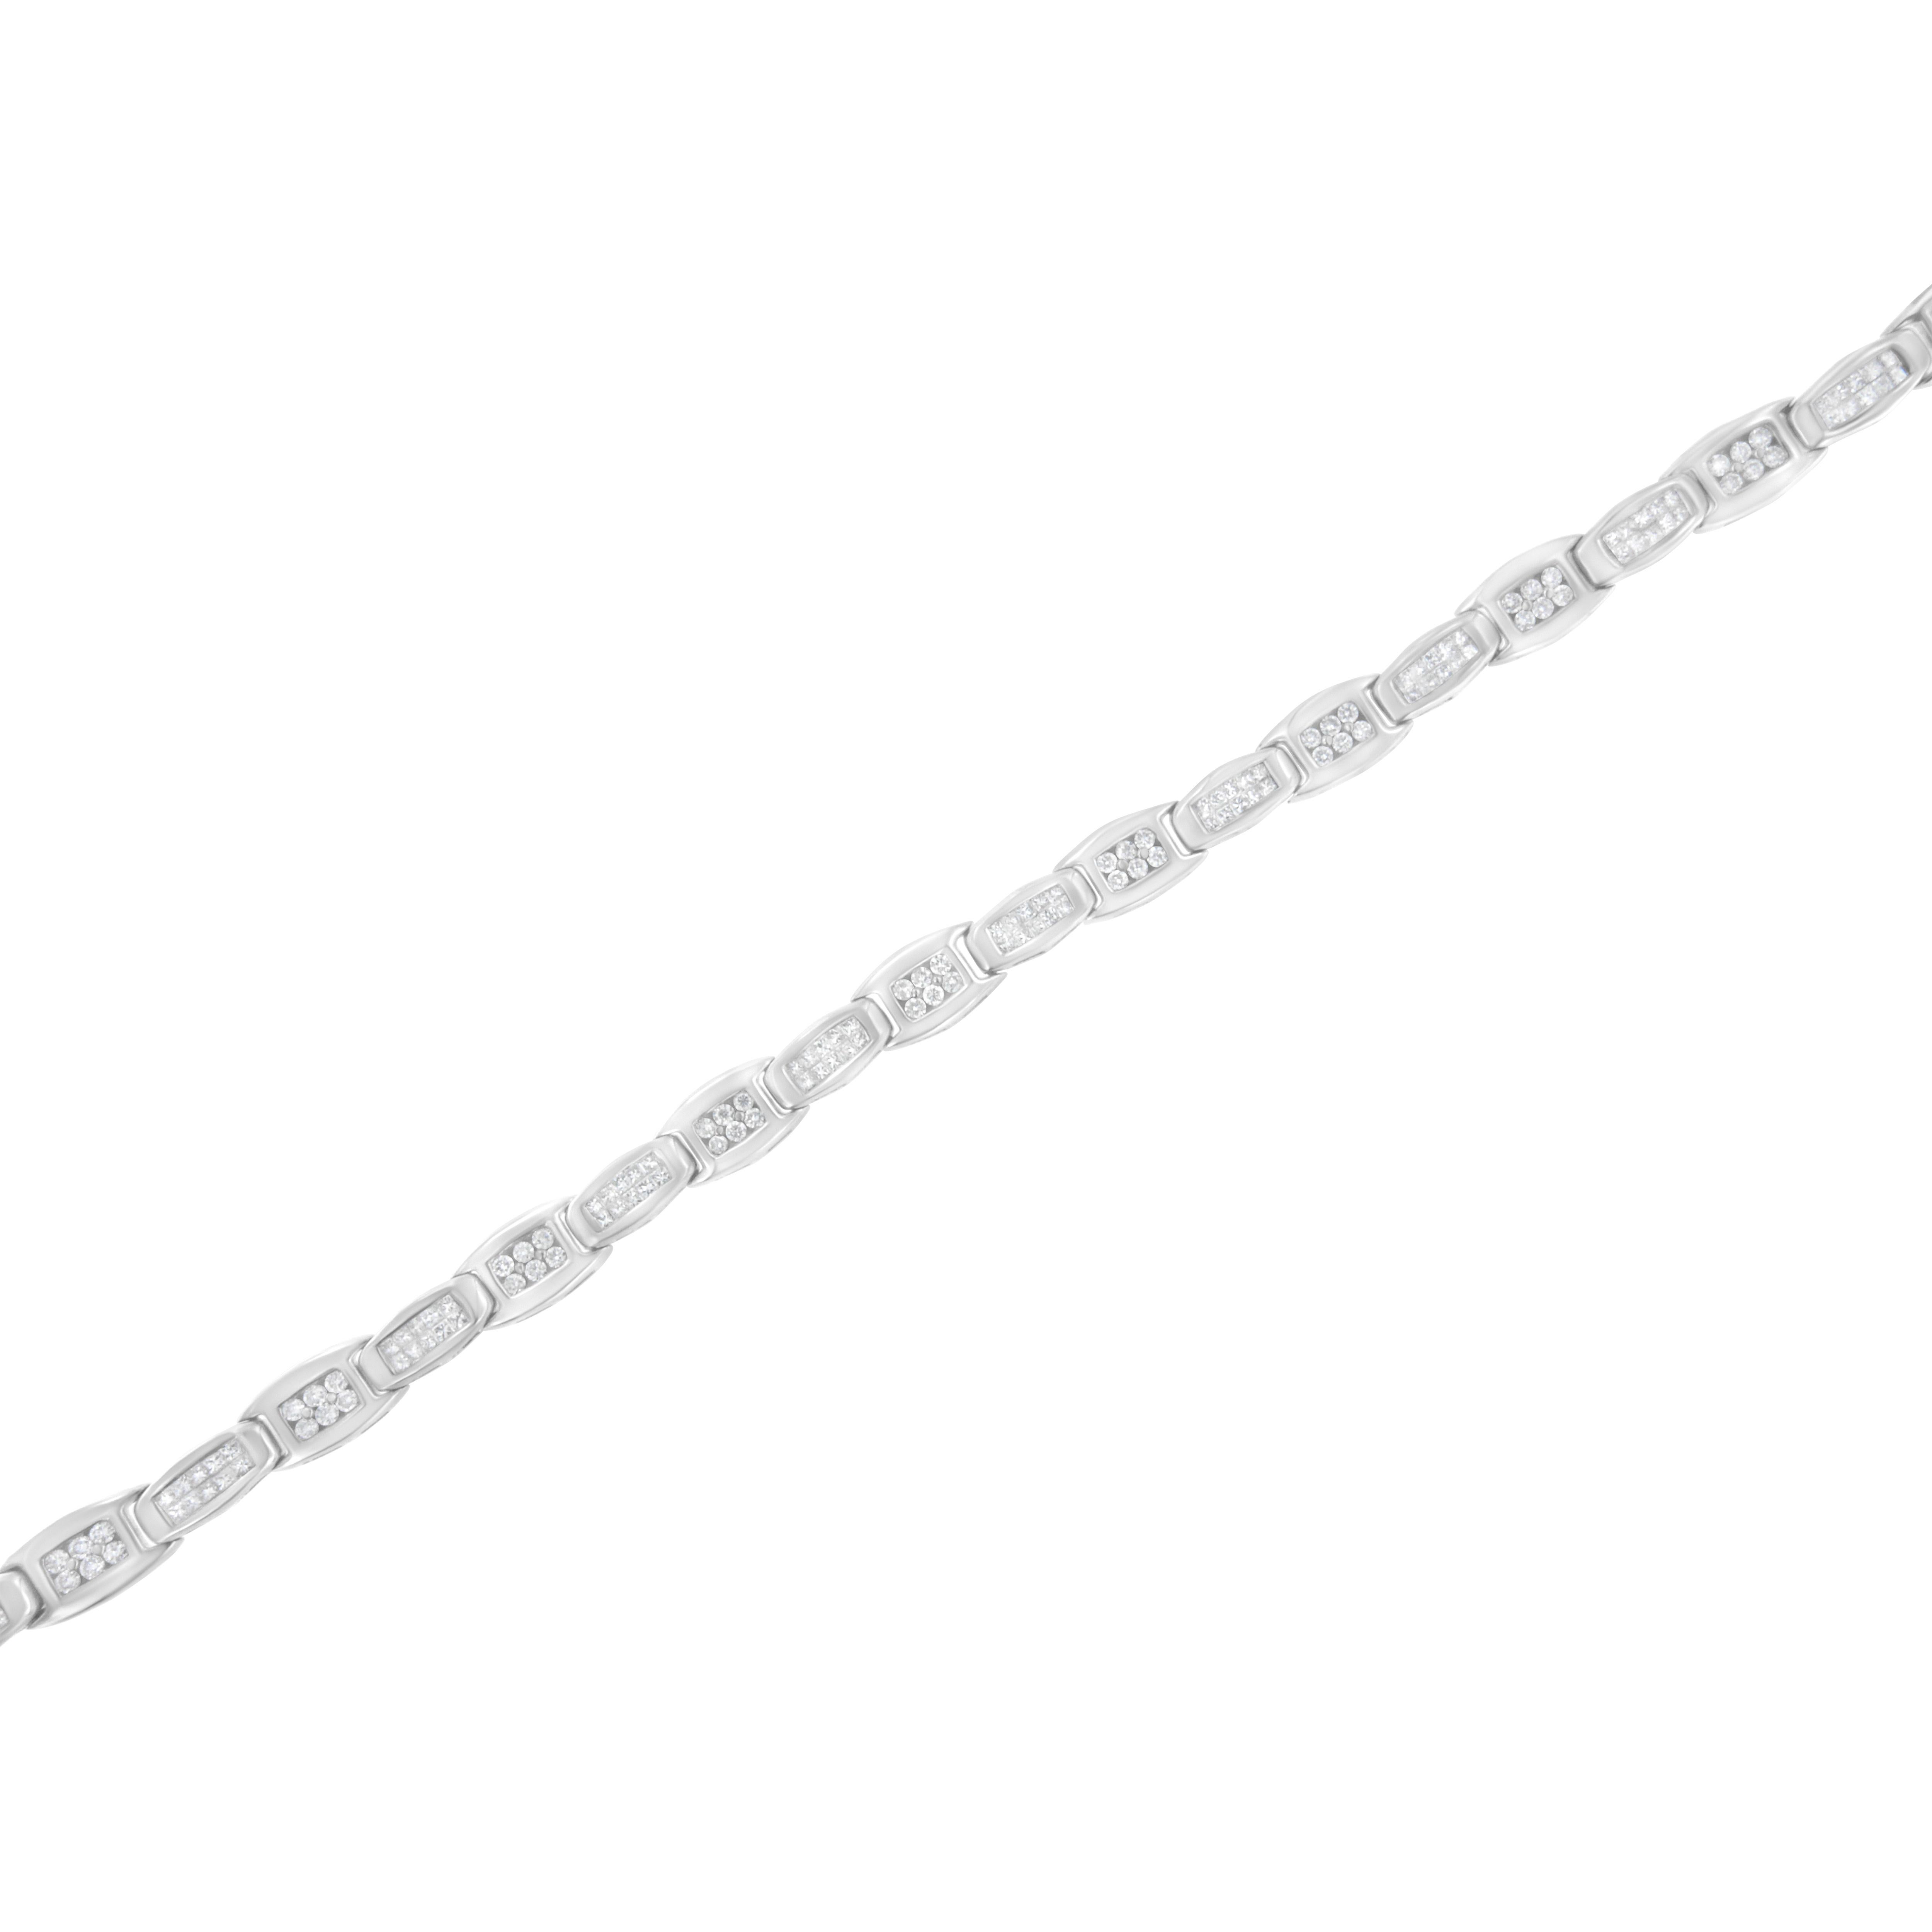 This gorgeous bracelet is designed with smaller white gold bands linking with larger bands. The smaller gold bands sparkle with two rows of princess cut diamonds while the larger ones hold six prong set round cut diamonds. This 14k white gold tennis